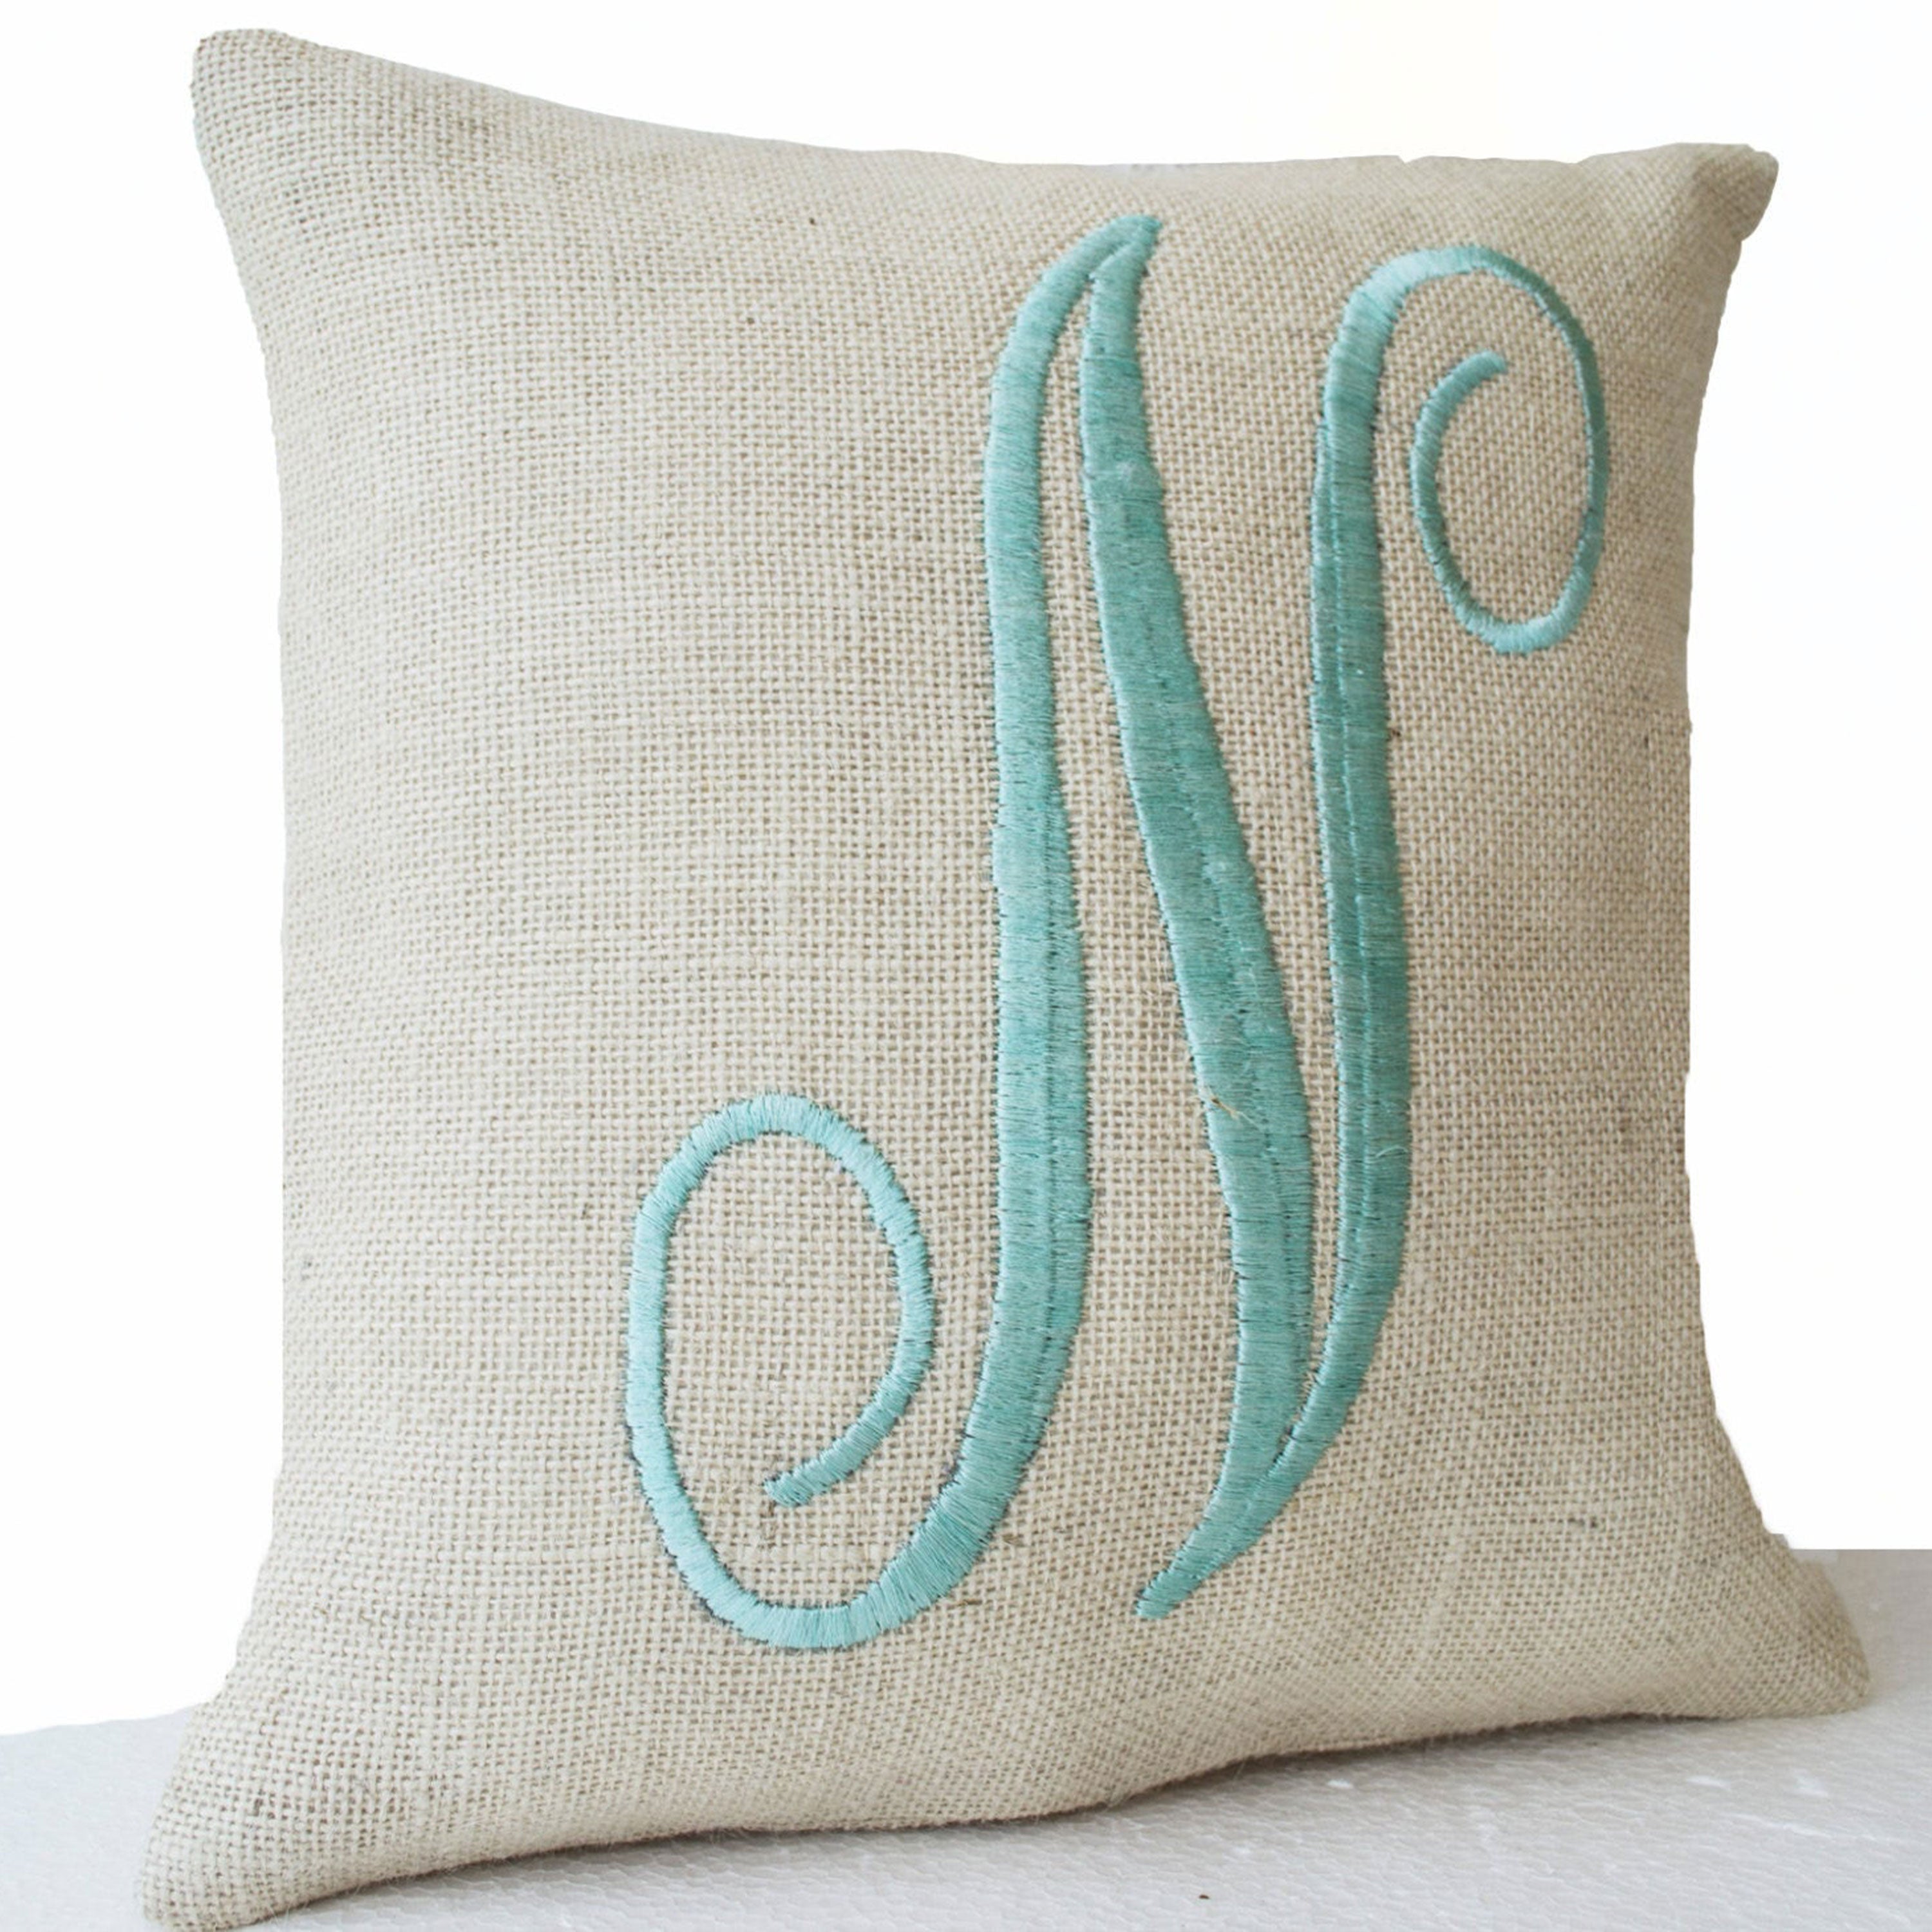 Monogram Pillows- Ivory burlap with mint embroidered letter throw pillow- Custom letter pillows- Gift- 16x16- Cursive letter monogram pillow